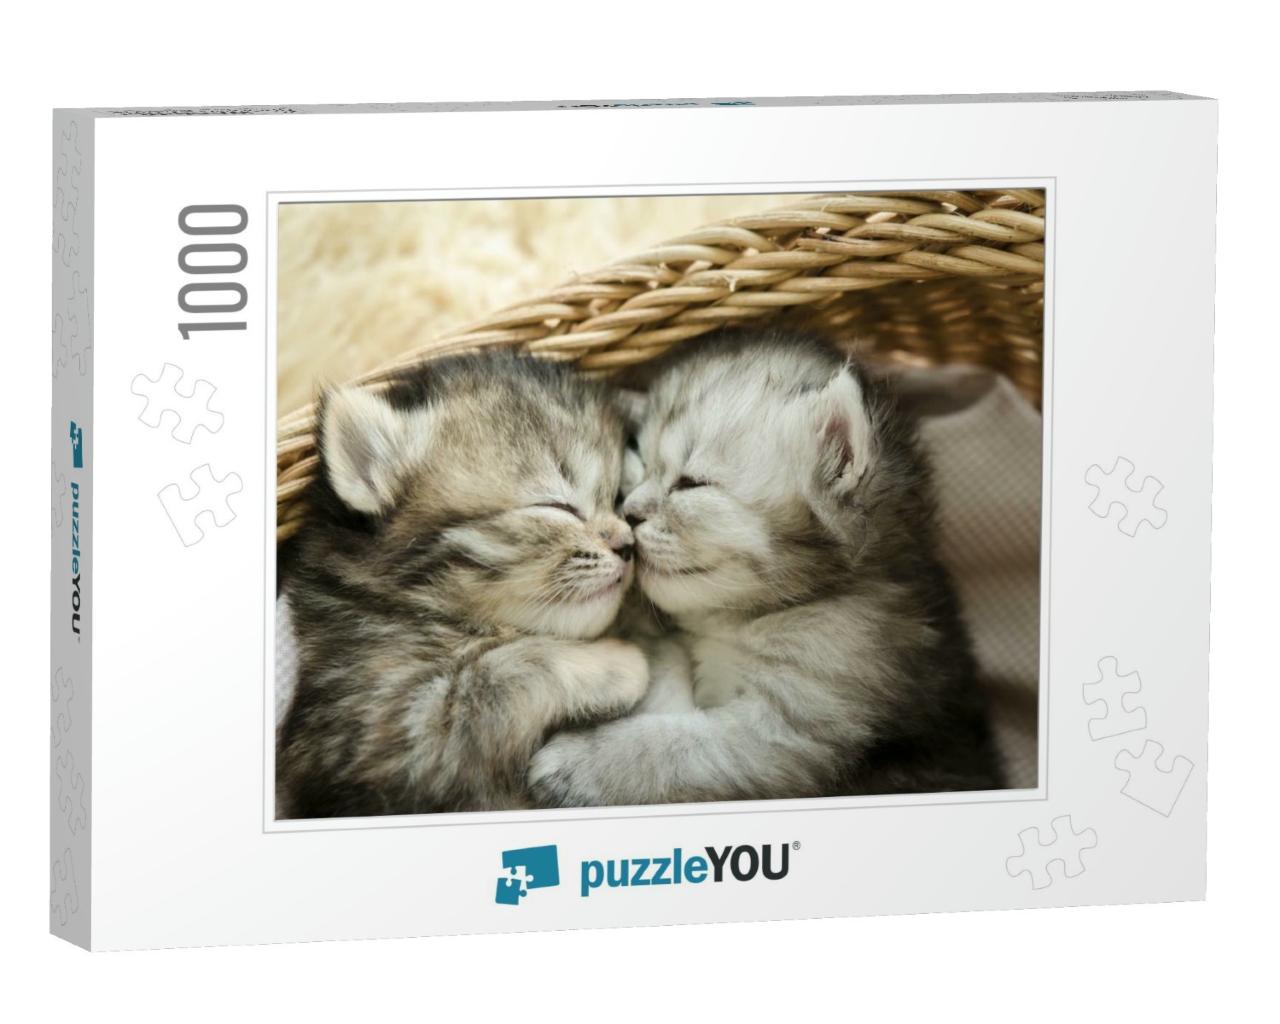 Cute Tabby Kittens Sleeping & Hugging in a Basket... Jigsaw Puzzle with 1000 pieces